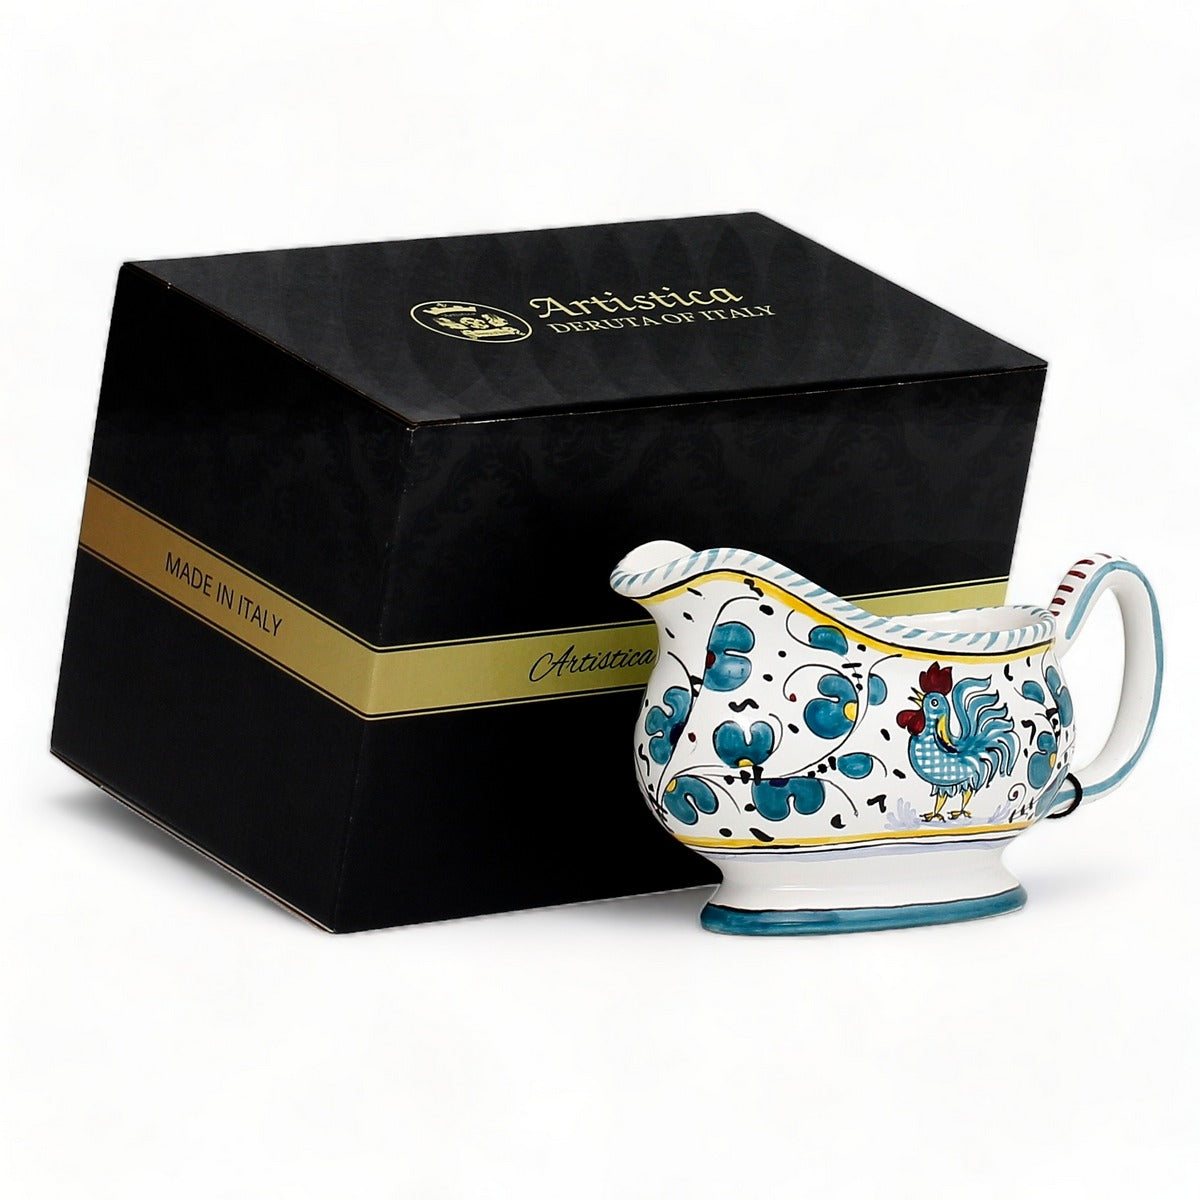 GIFT BOX: With authentic Deruta hand painted ceramic - Gravy Sauce Boat Green Rooster Design